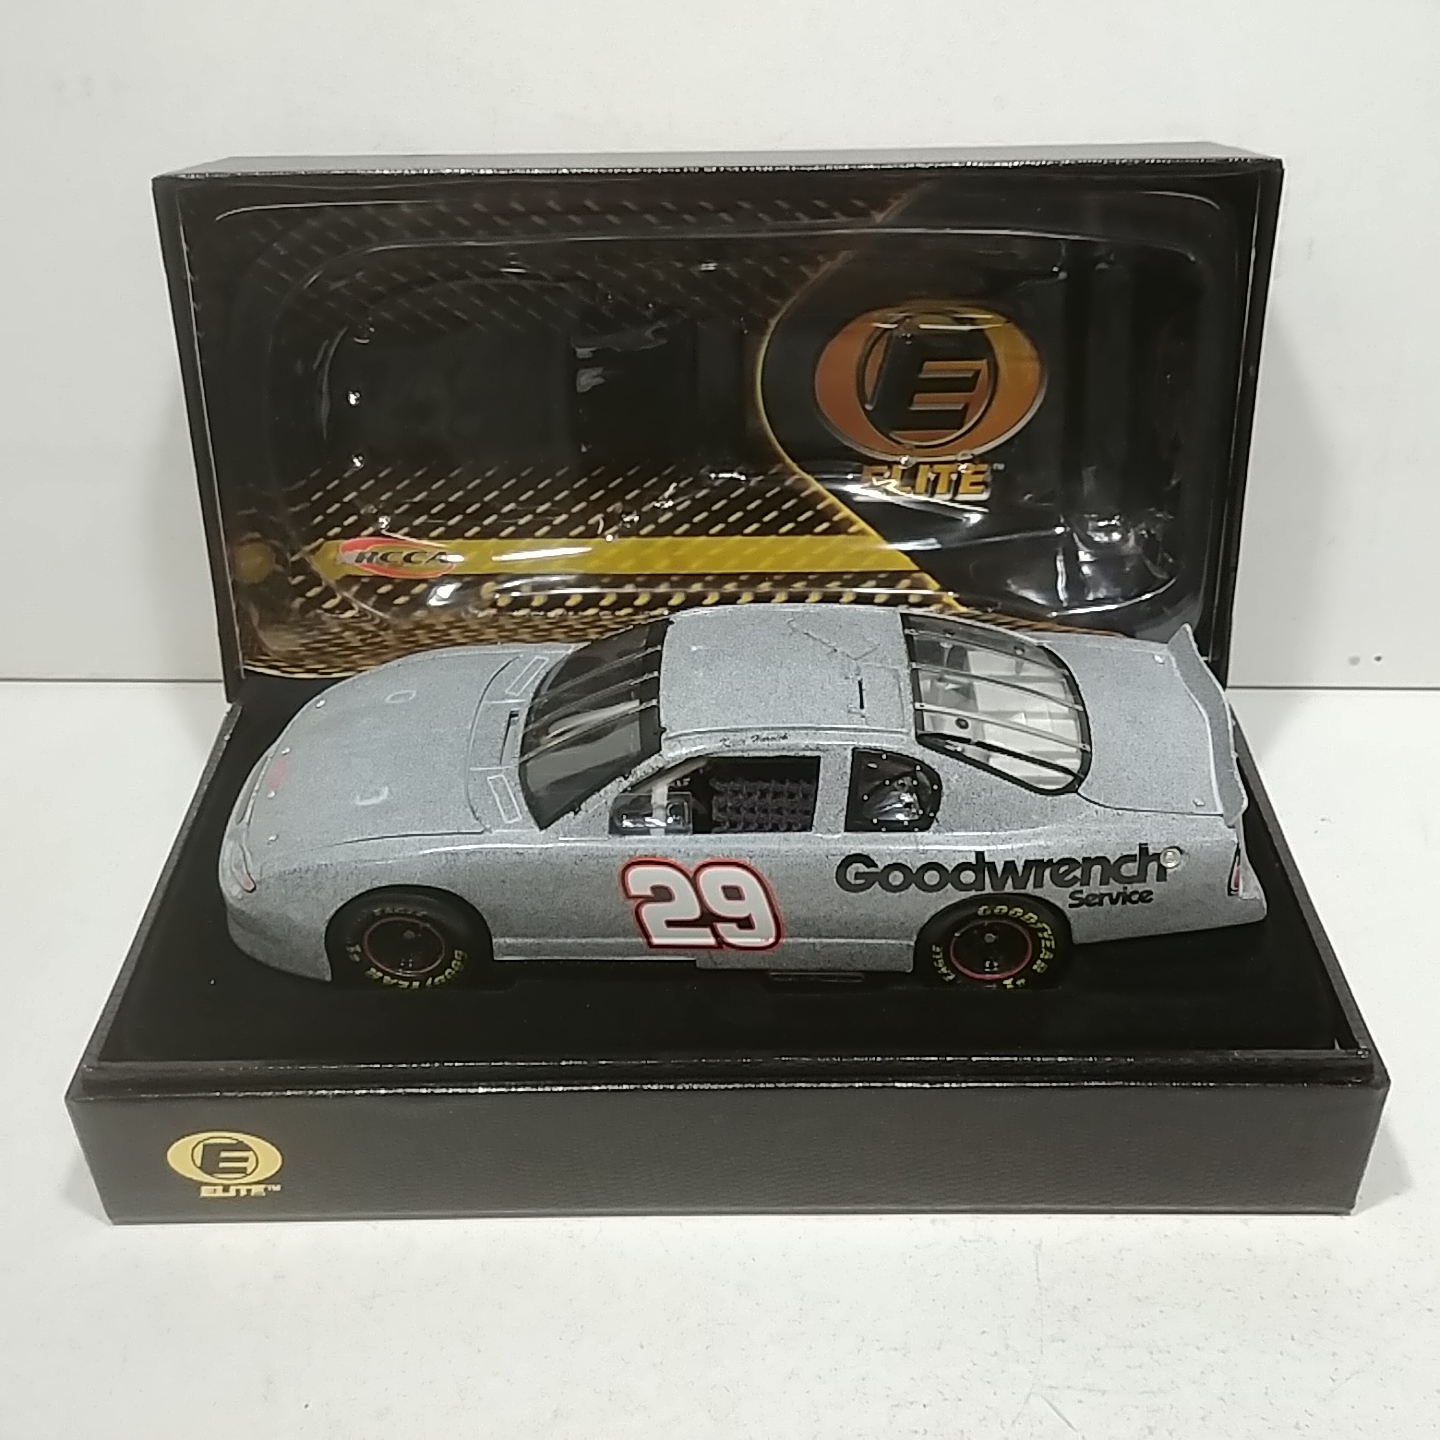 2002 Kevin Harvick 1/24th Goodwrench "Test" Elite Monte Carlo